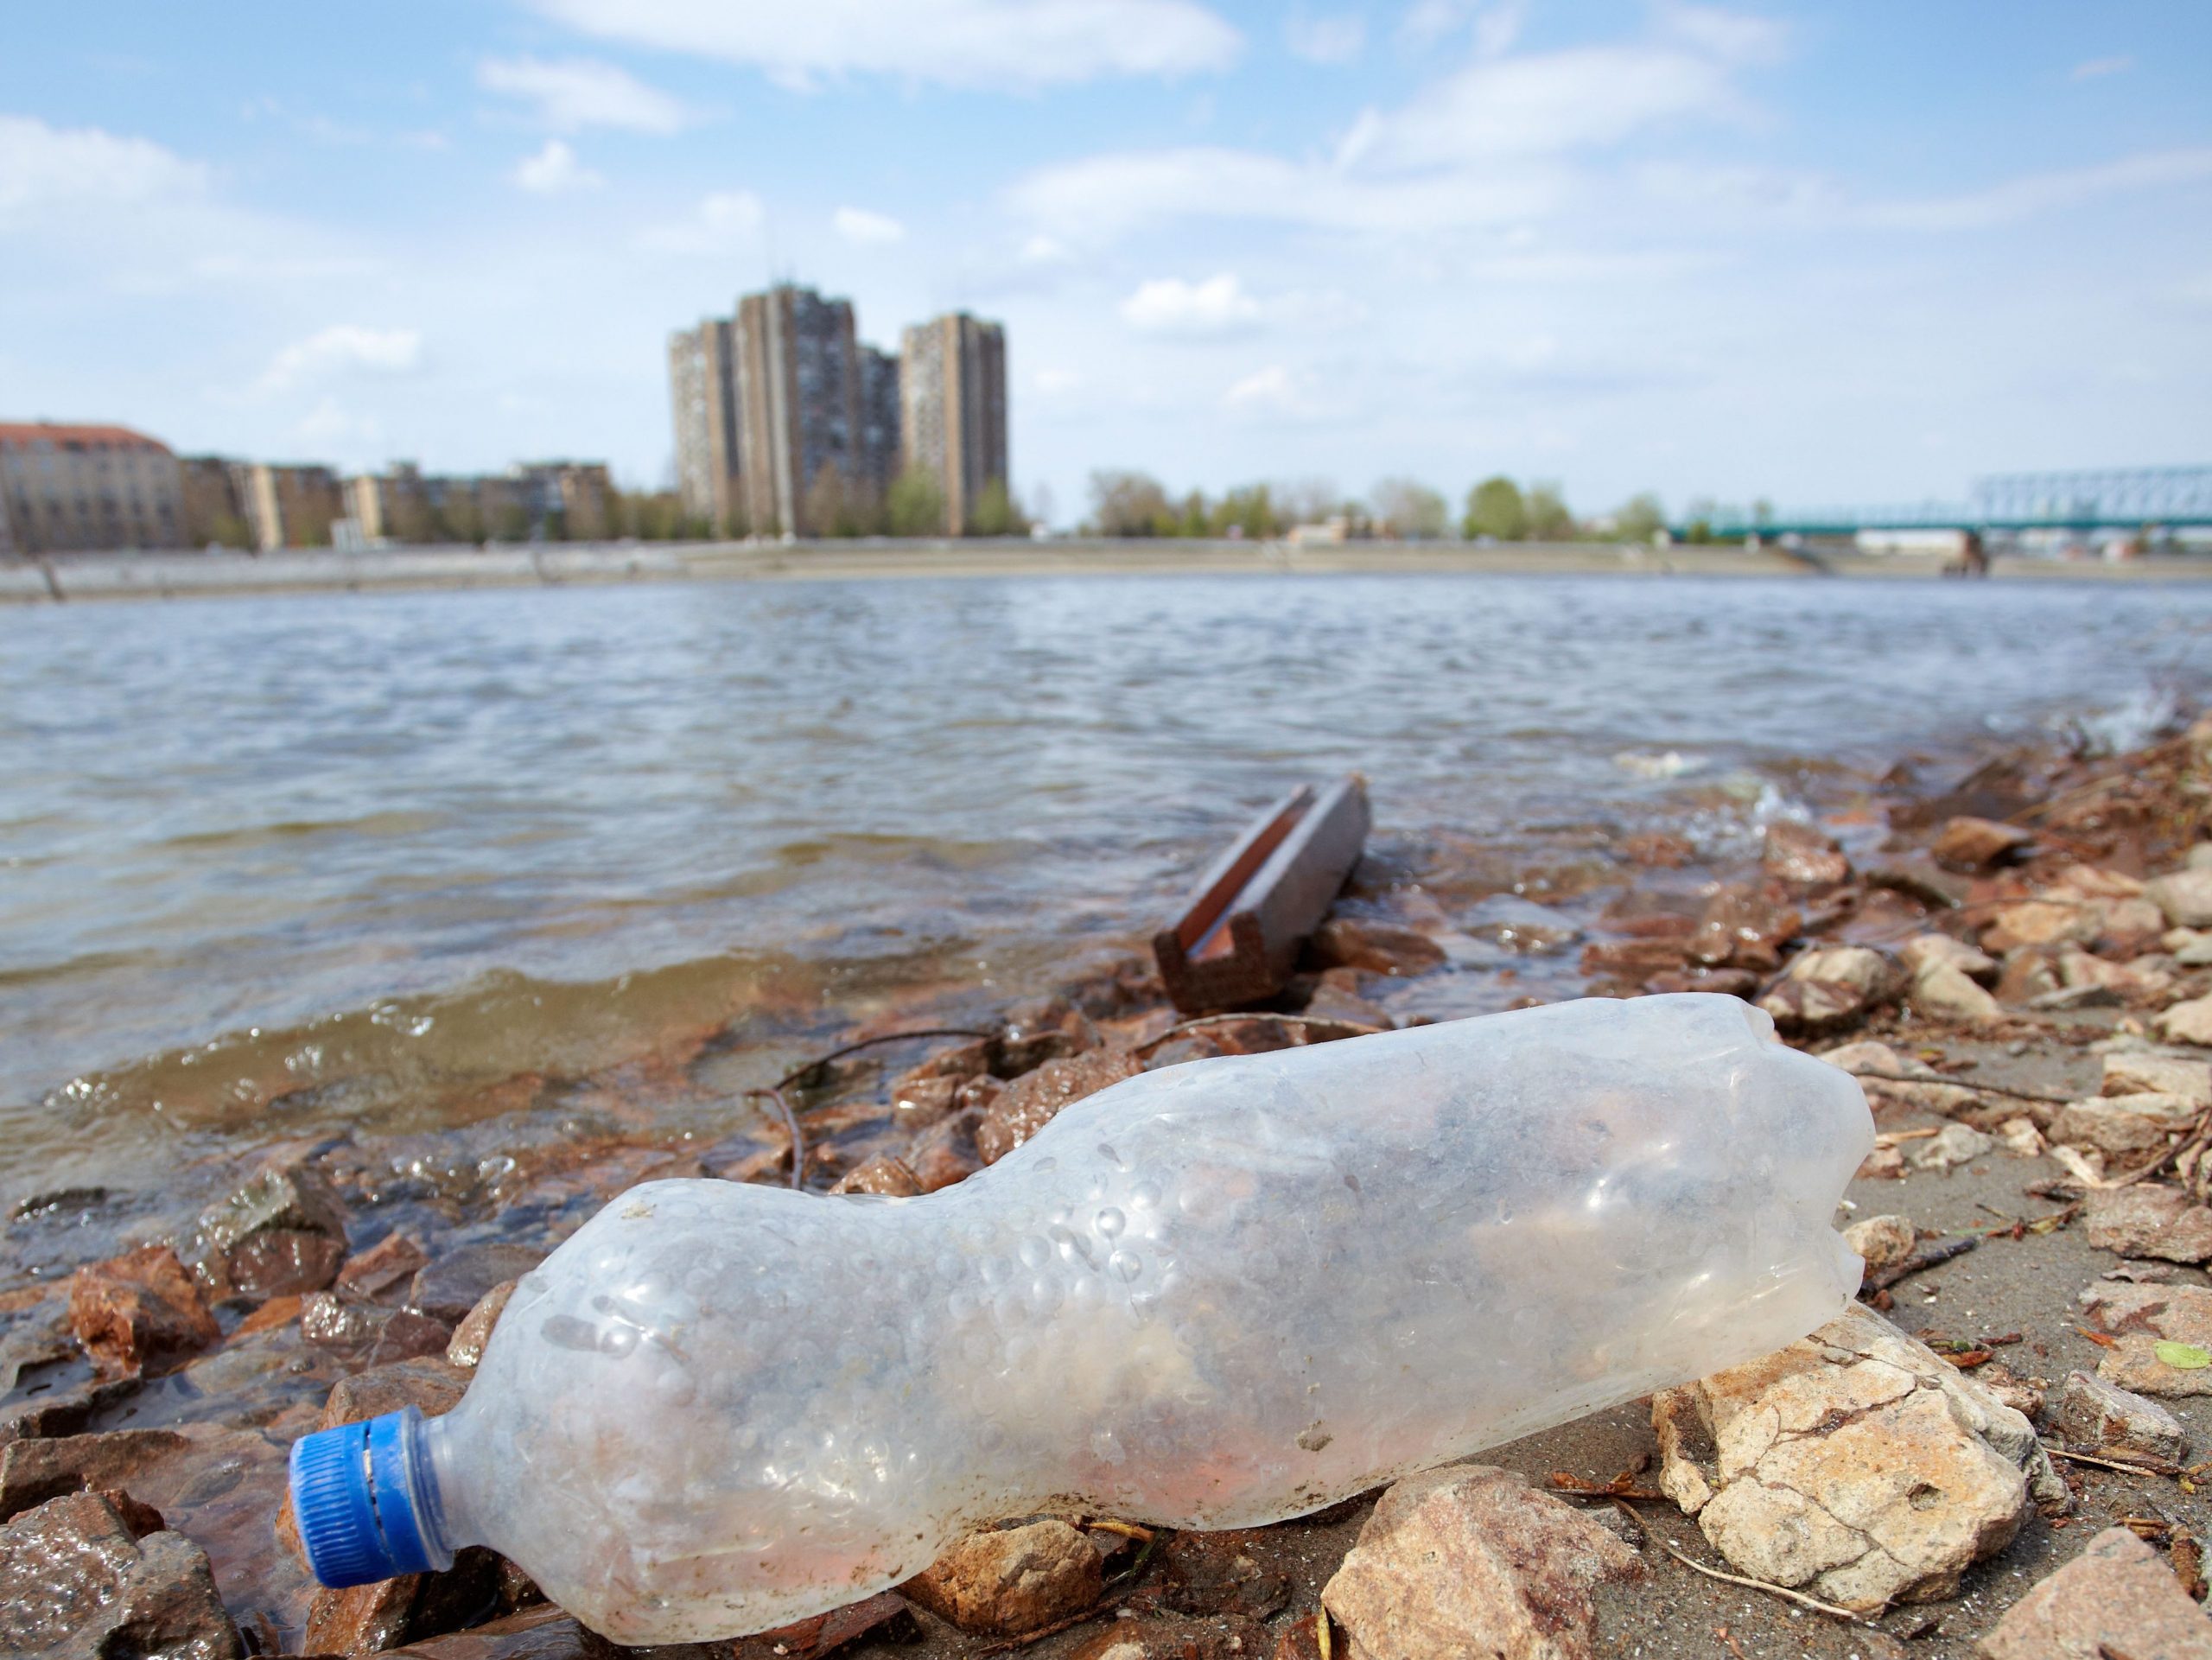 Image showing a plastic bottle next to one of Britain's waterways